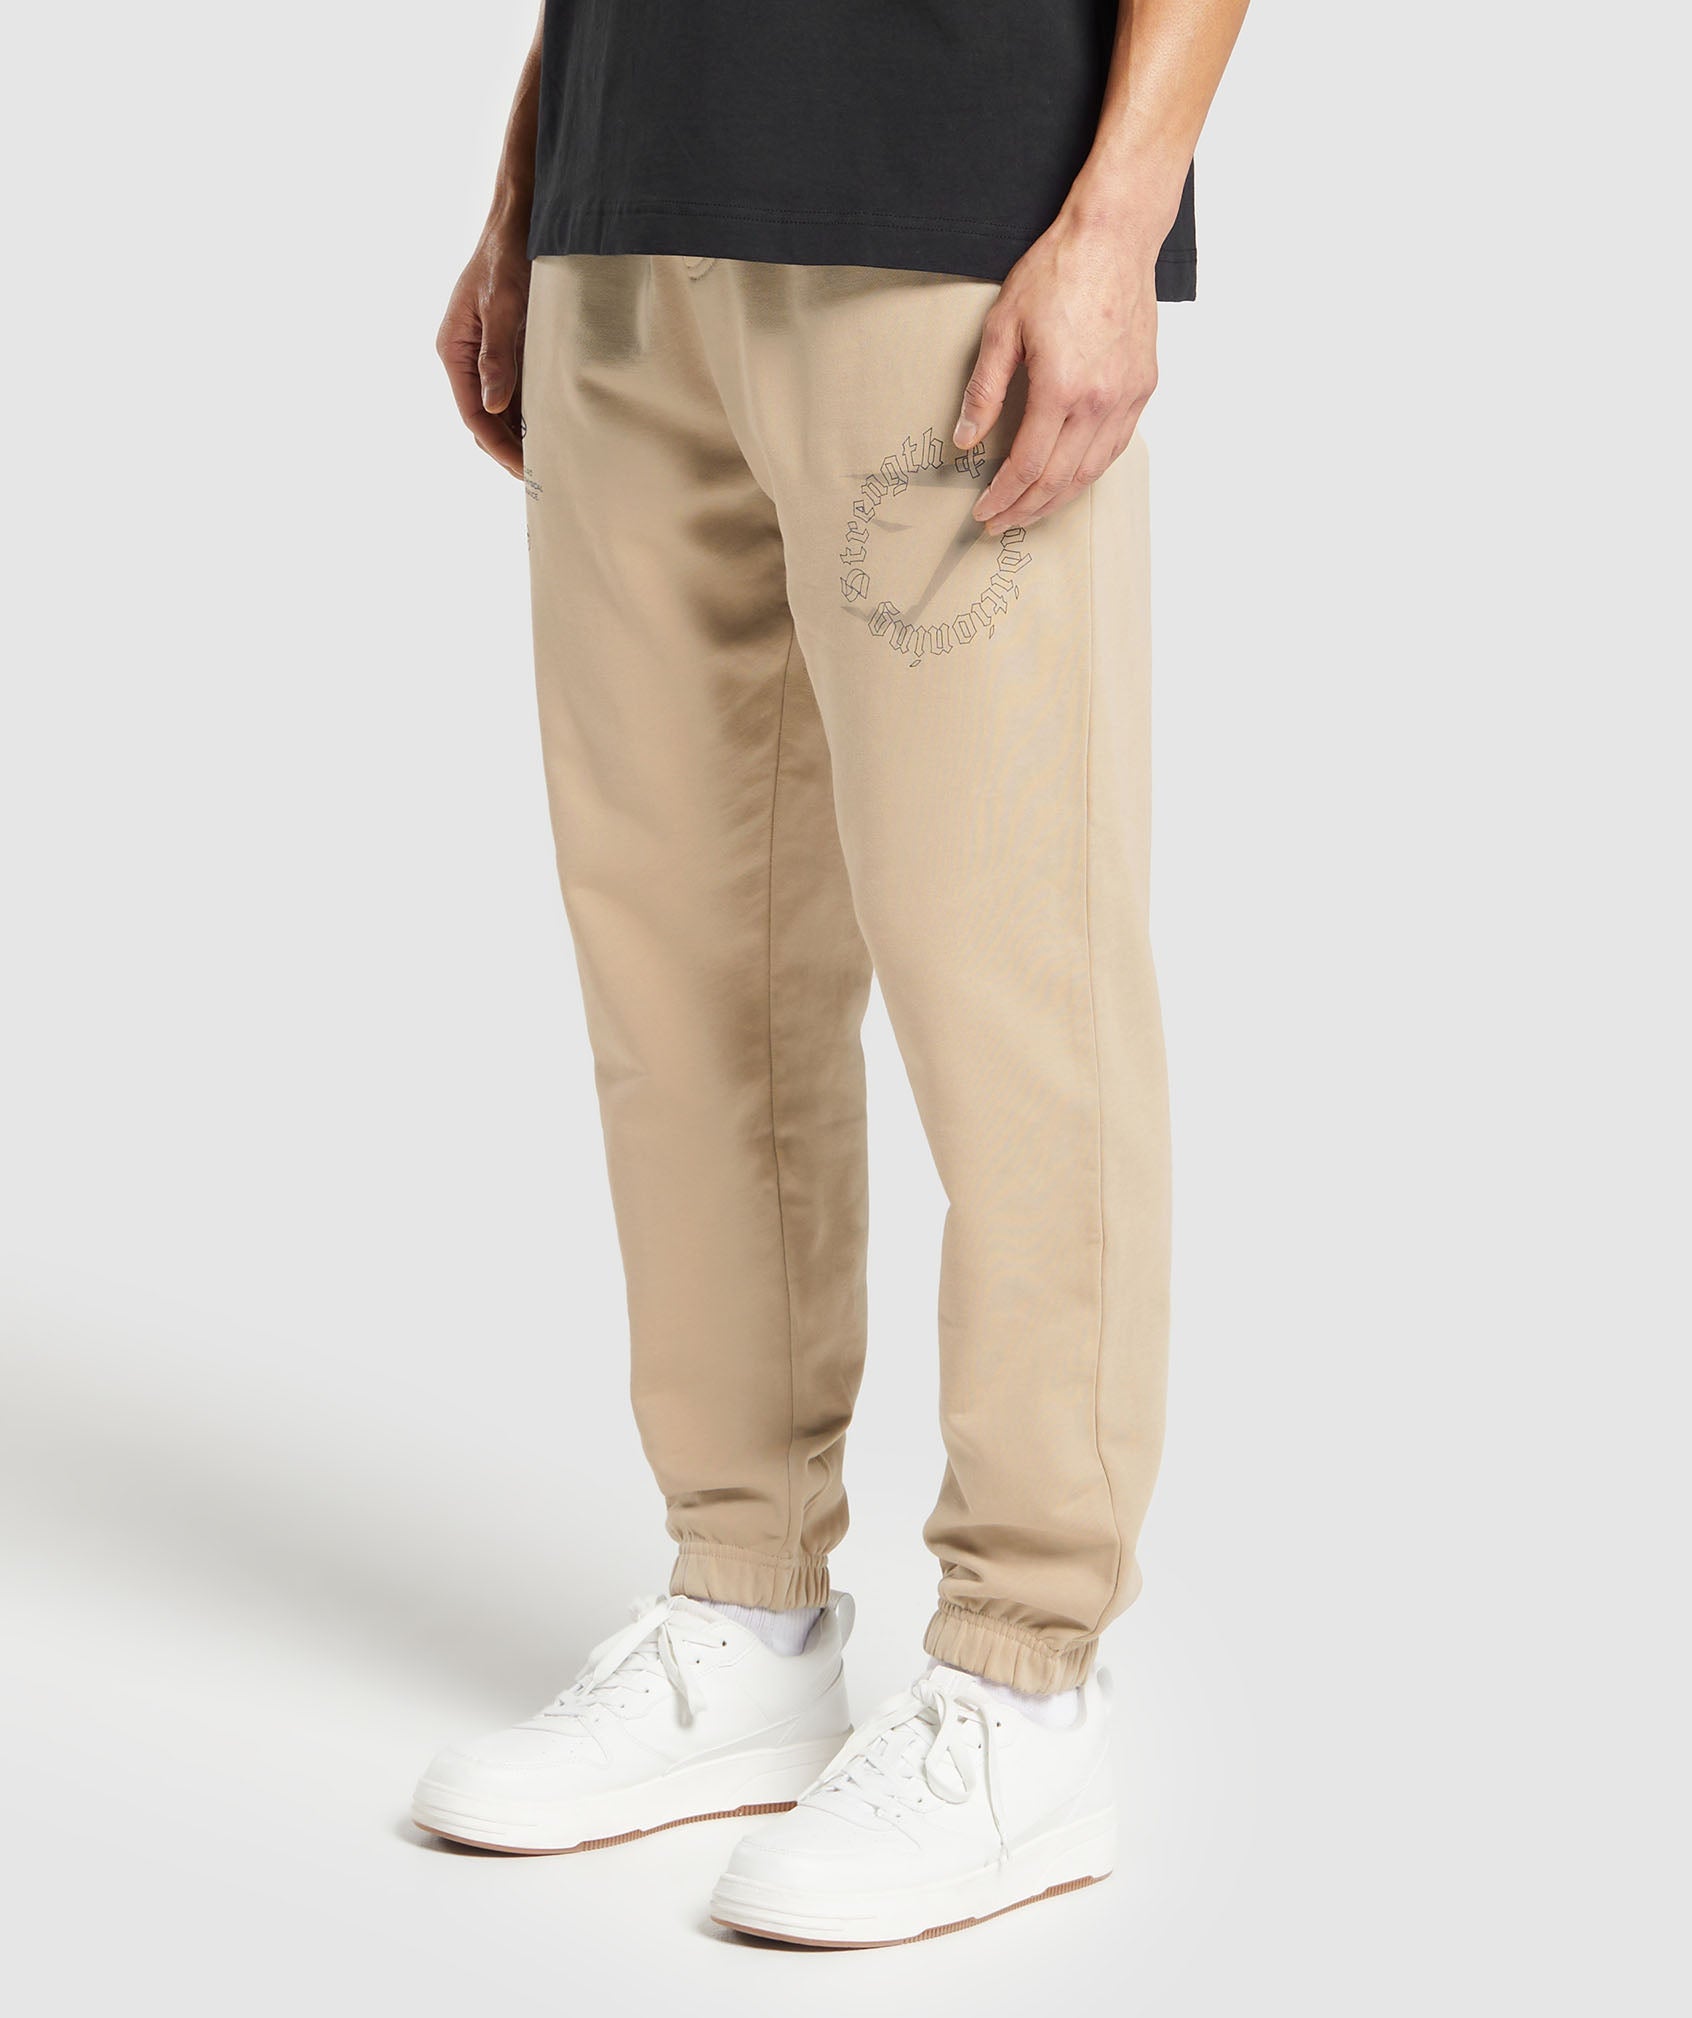 Strength and Conditioning Joggers in Vanilla Beige - view 3